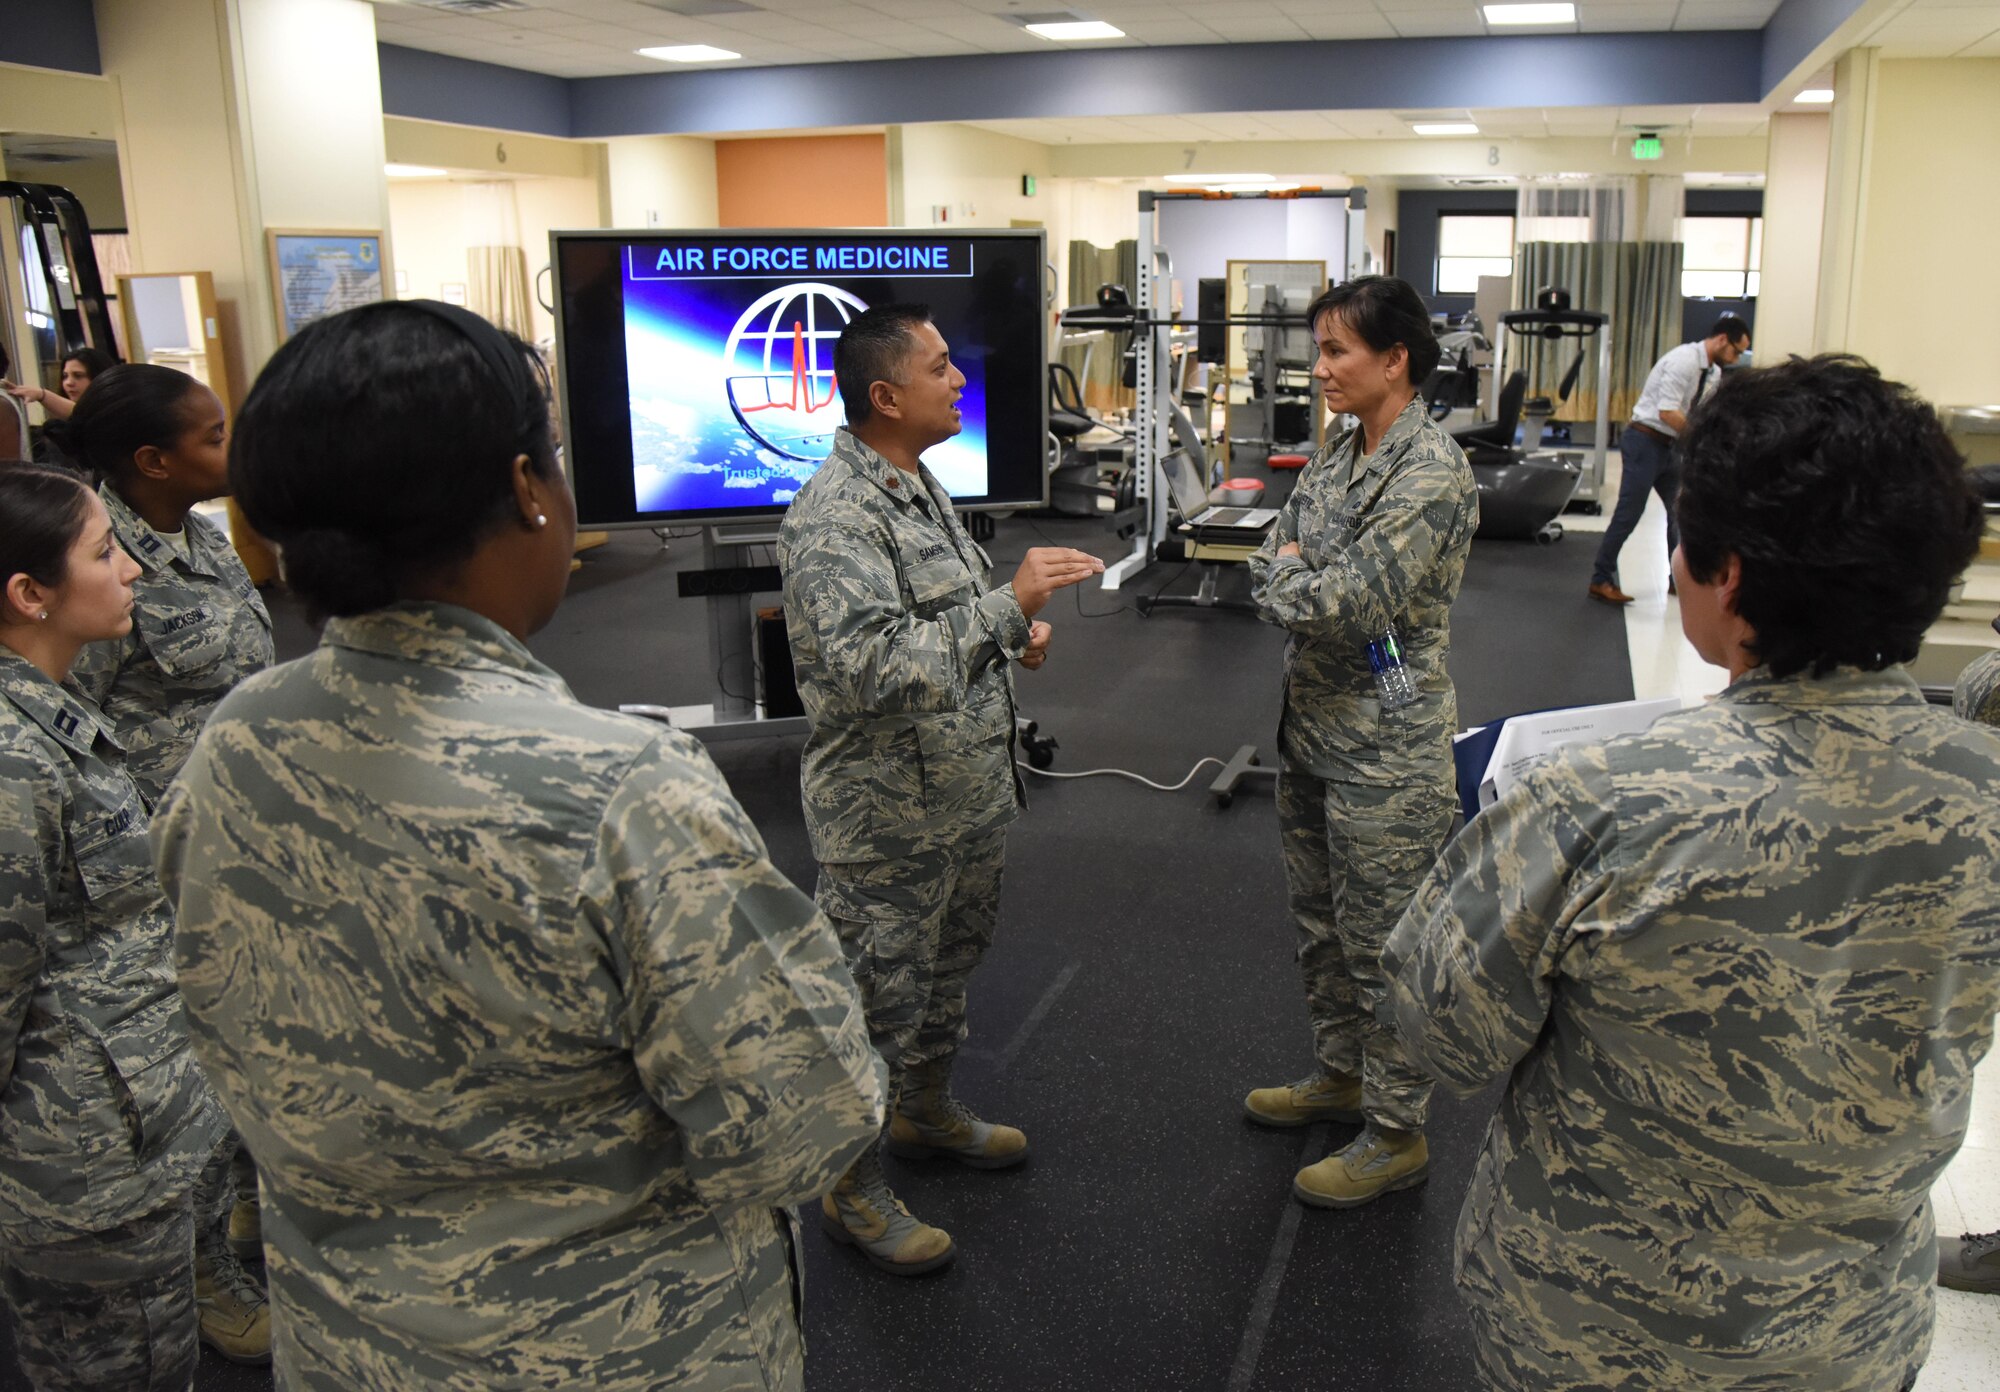 Maj. Jeremiah Samson, 81st Surgical Operations Squadron surgical services flight commander, briefs Col. Debra Lovette, 81st Training Wing commander, on physical therapy capabilities and procedures during an 81st Medical Group orientation tour in the Keesler Medical Center June 16, 2017, on Keesler Air Force Base, Miss. The purpose of the tour was to familiarize Lovette with the group’s mission, operations and personnel. (U.S. Air Force photo by Kemberly Groue)